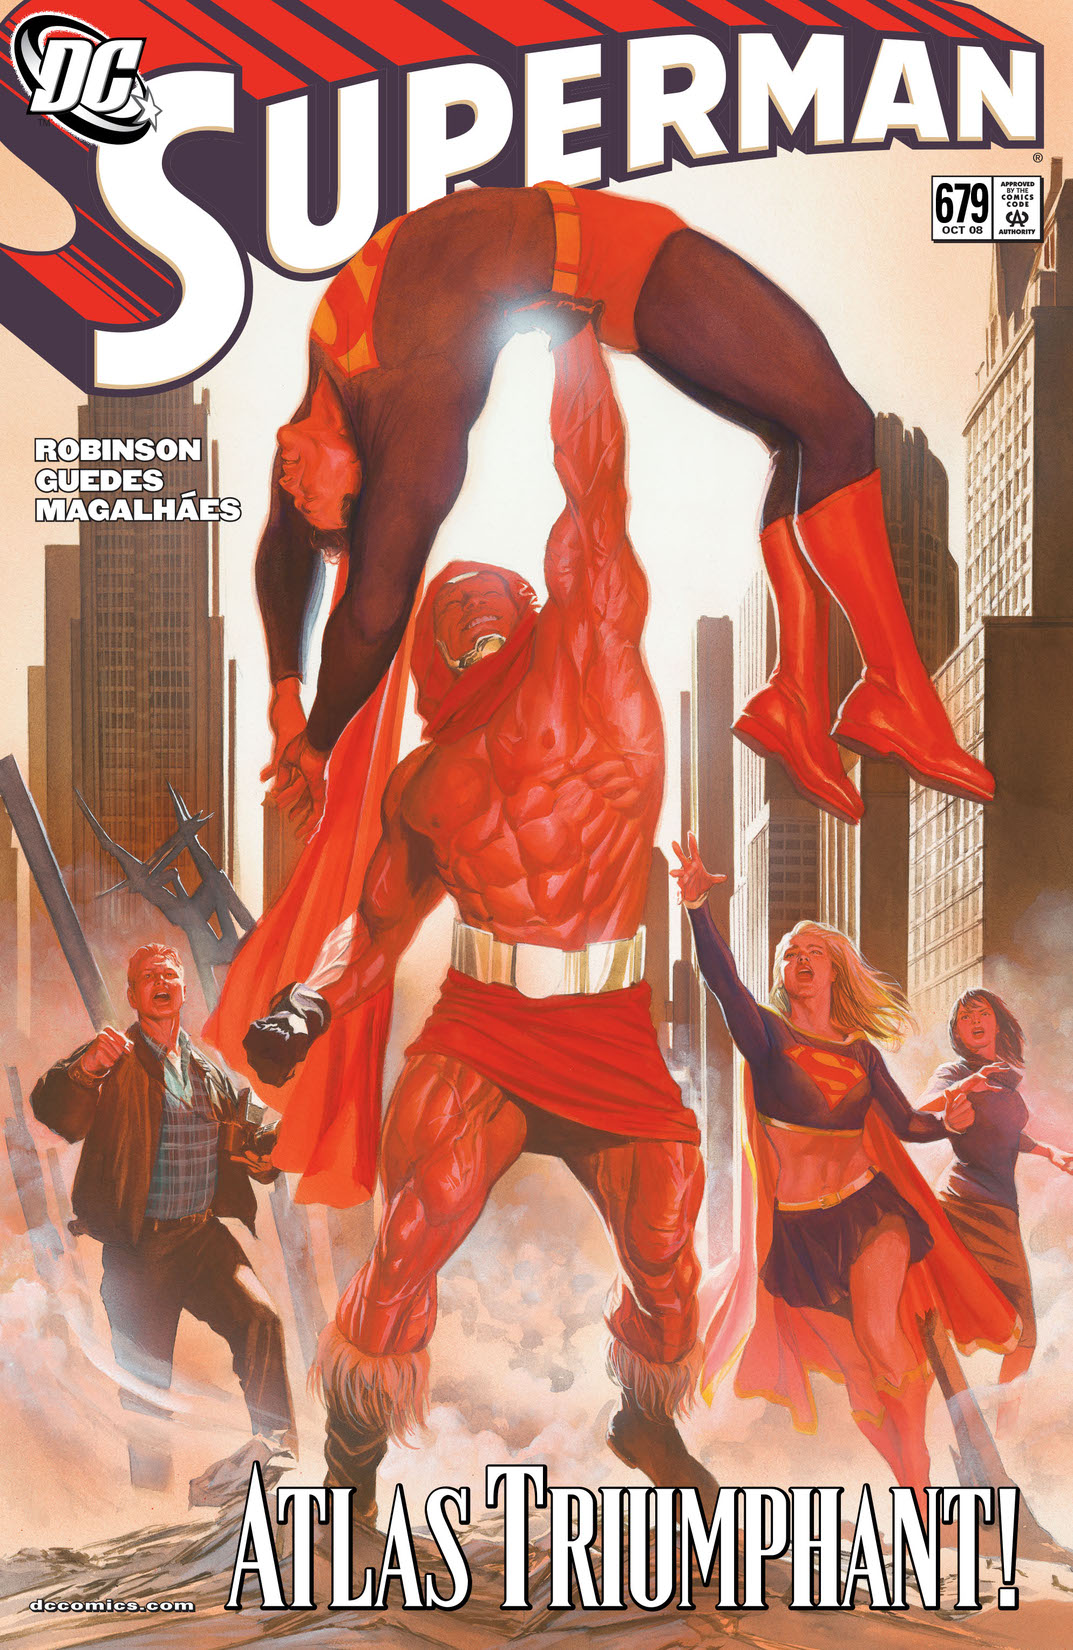 Superman (2006-) #679 preview images